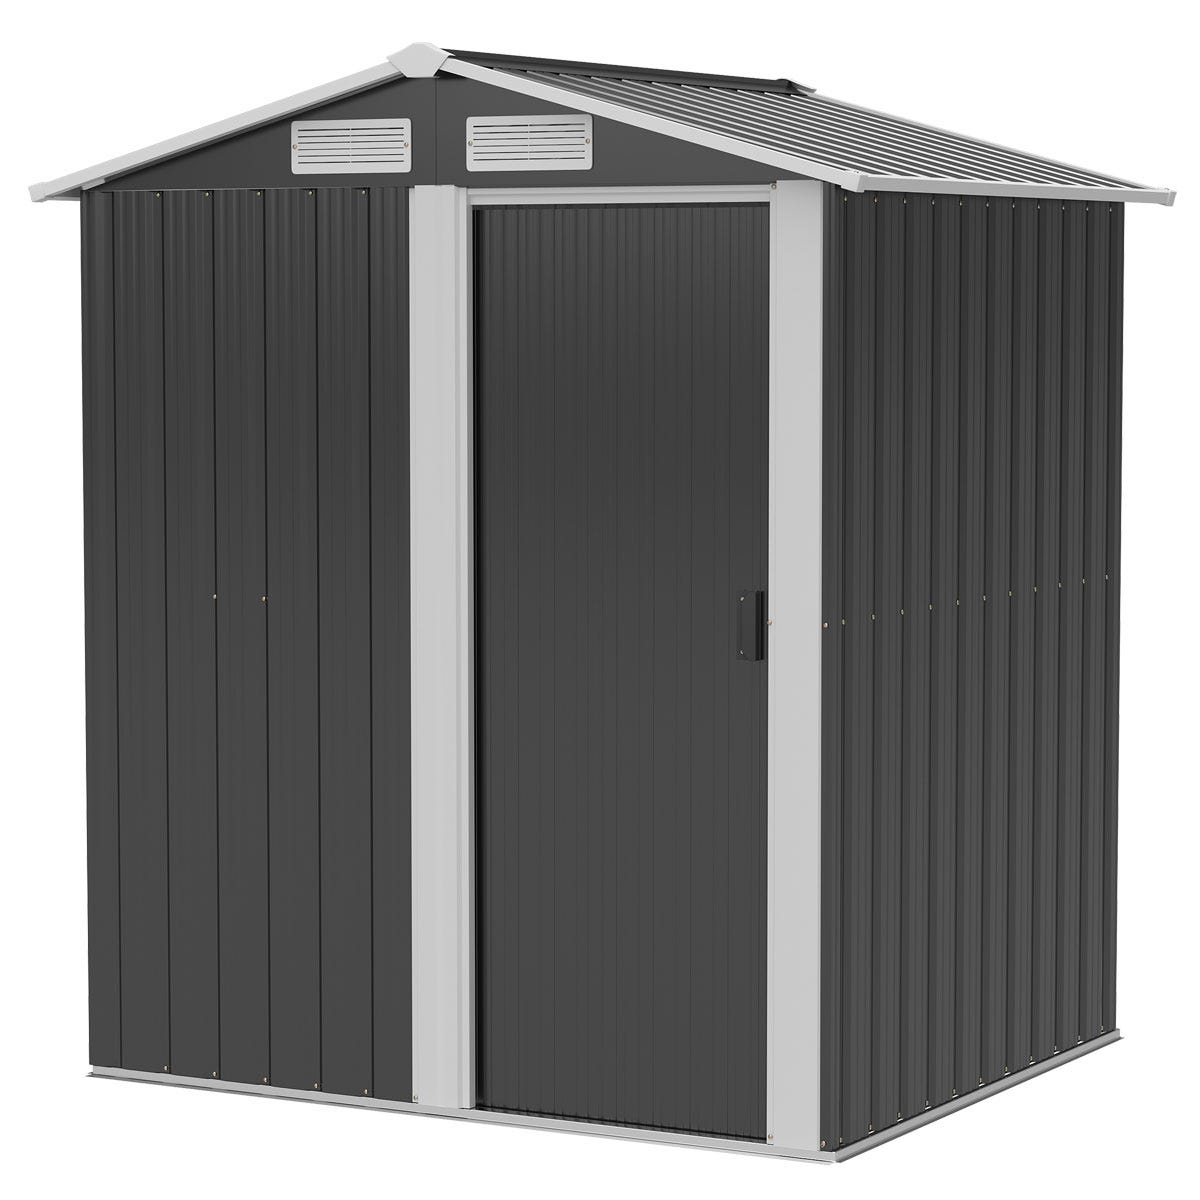 Outsunny 5 x 4ft Outdoor Storage Shed w/ Sliding Door - Grey